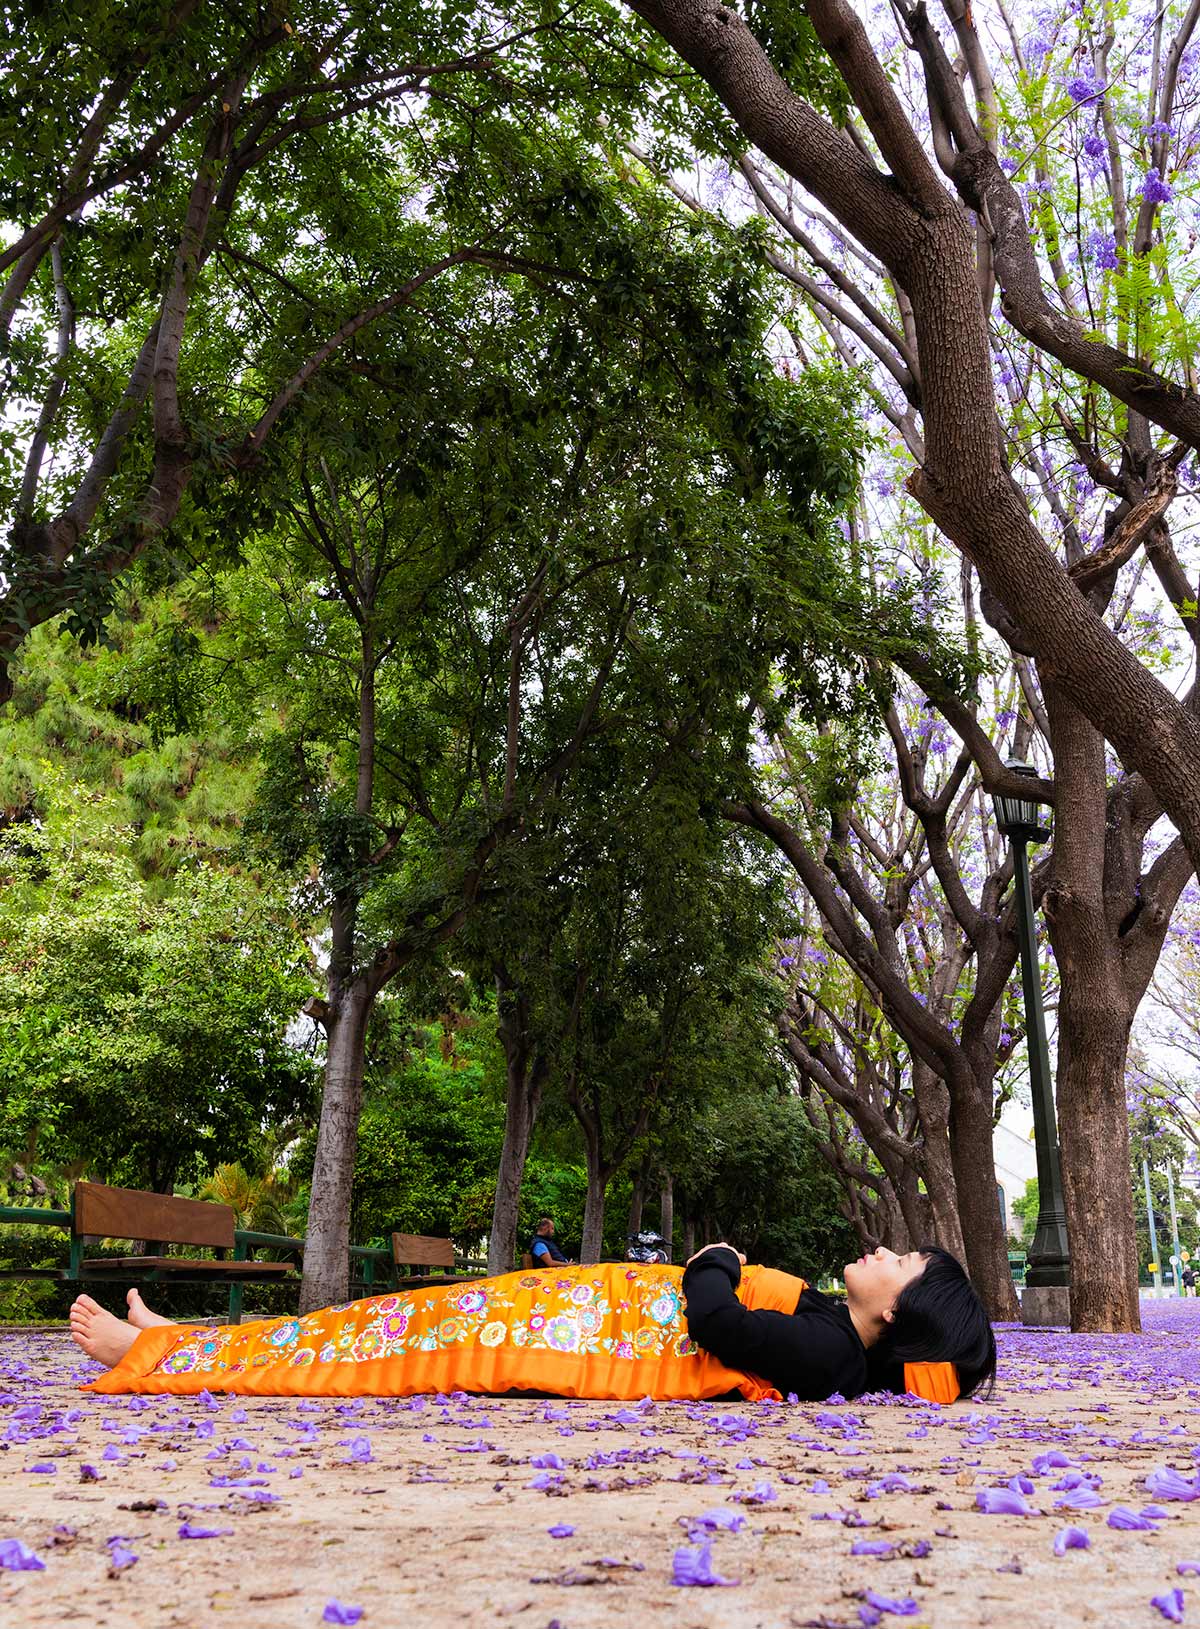 Chun Hua Catherine Dong celebrates her death and sleeps on ground where flowers surround her in Athens